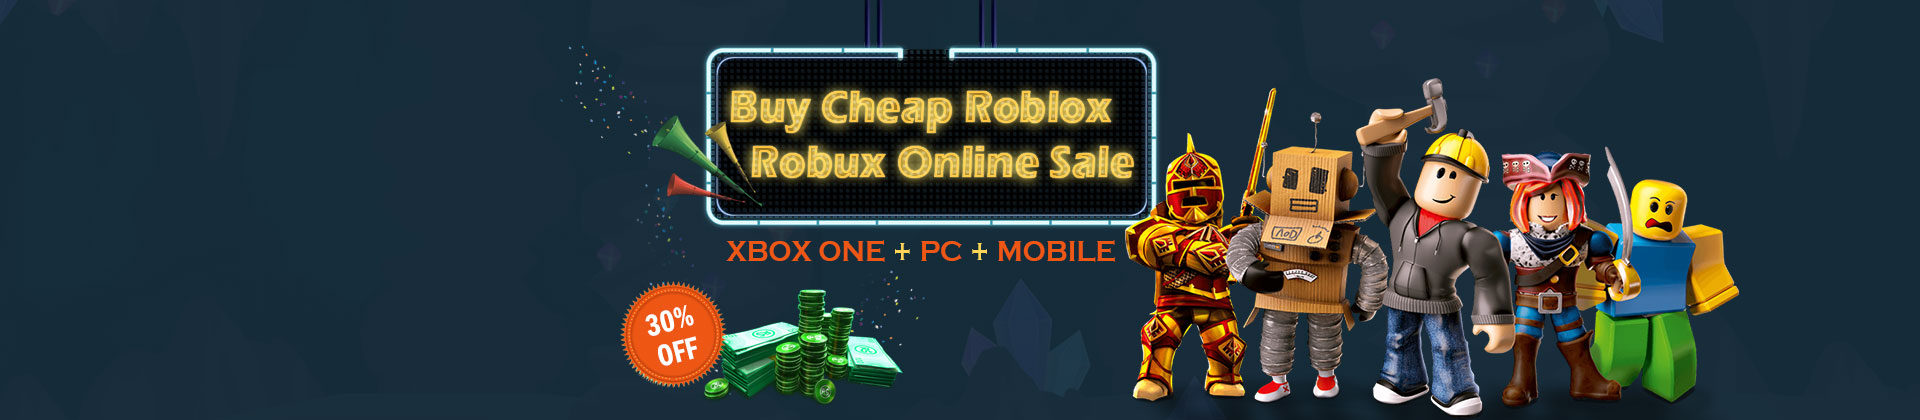 50 Off 5mmo Com Coupon Code Promo Code Jul 2021 - can you get robux from 5mmo if you didn't